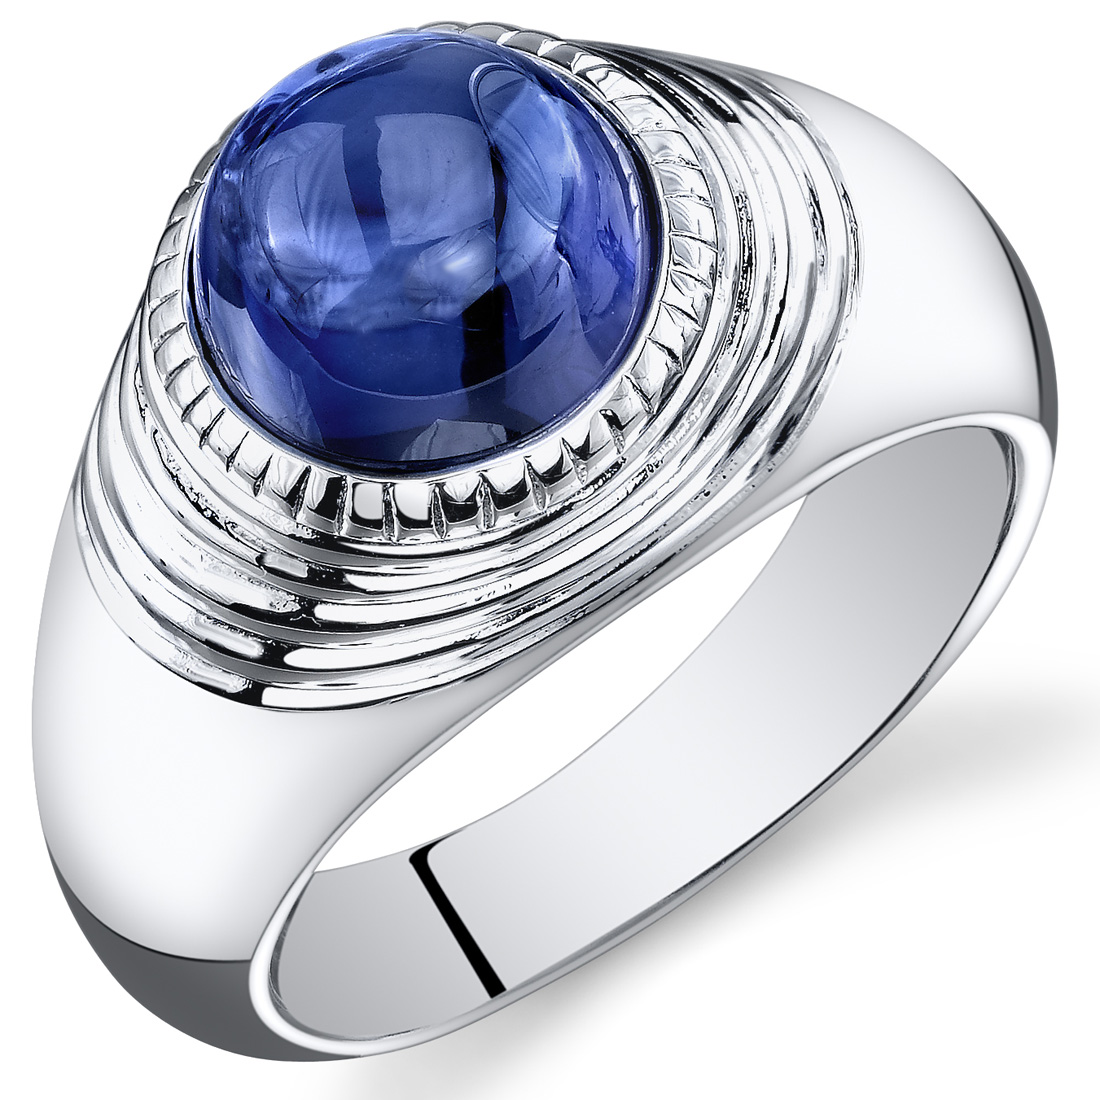 Mens 5.5 cts Round Cut Sapphire Sterling Silver Ring Sizes 8 To 13